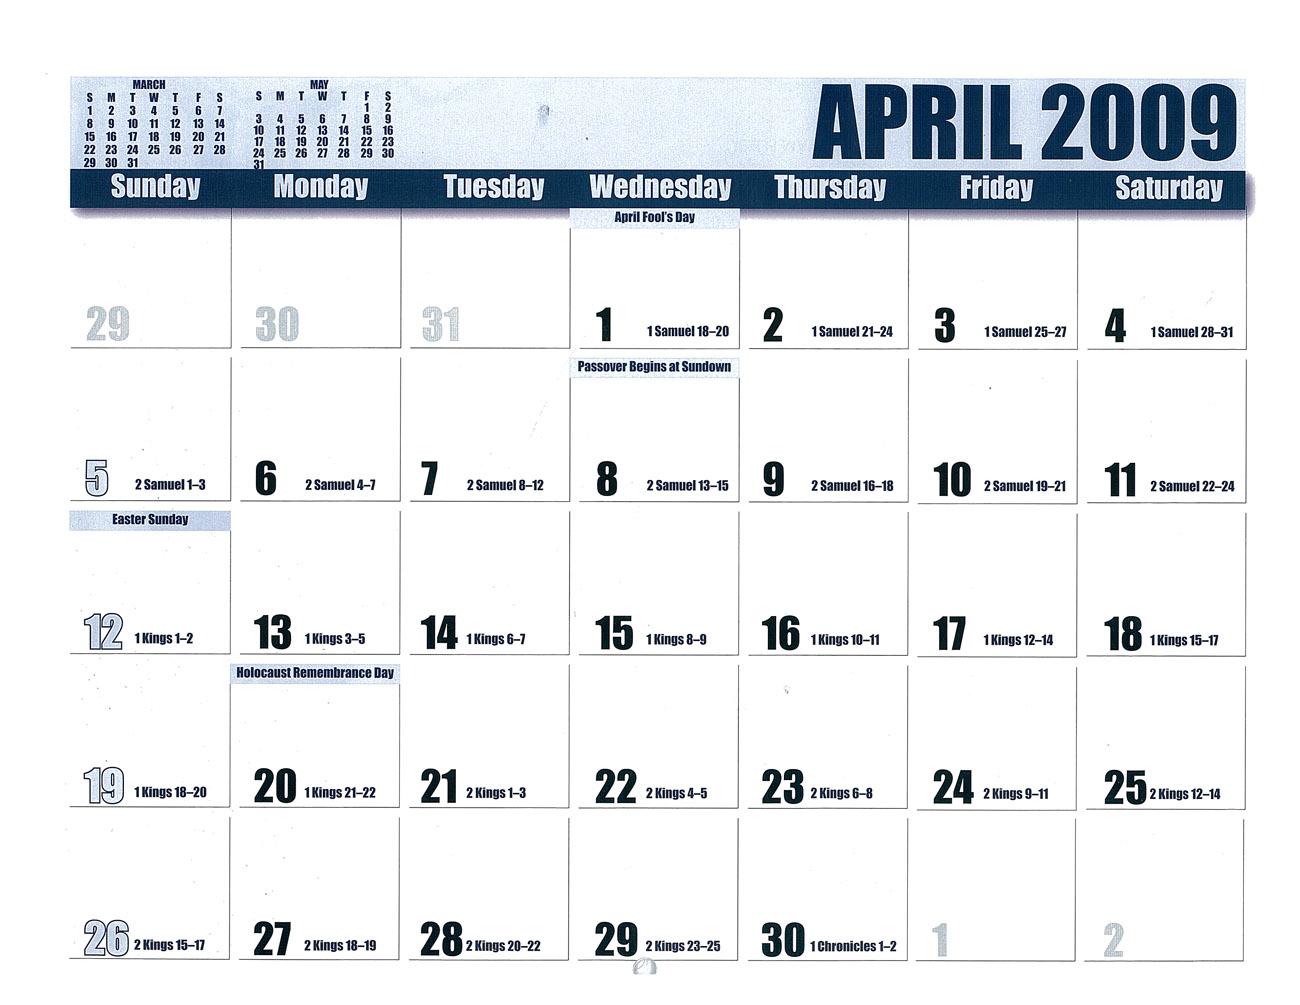 2009 Prophecy Calendar: April - refounding of Istrael as a nation